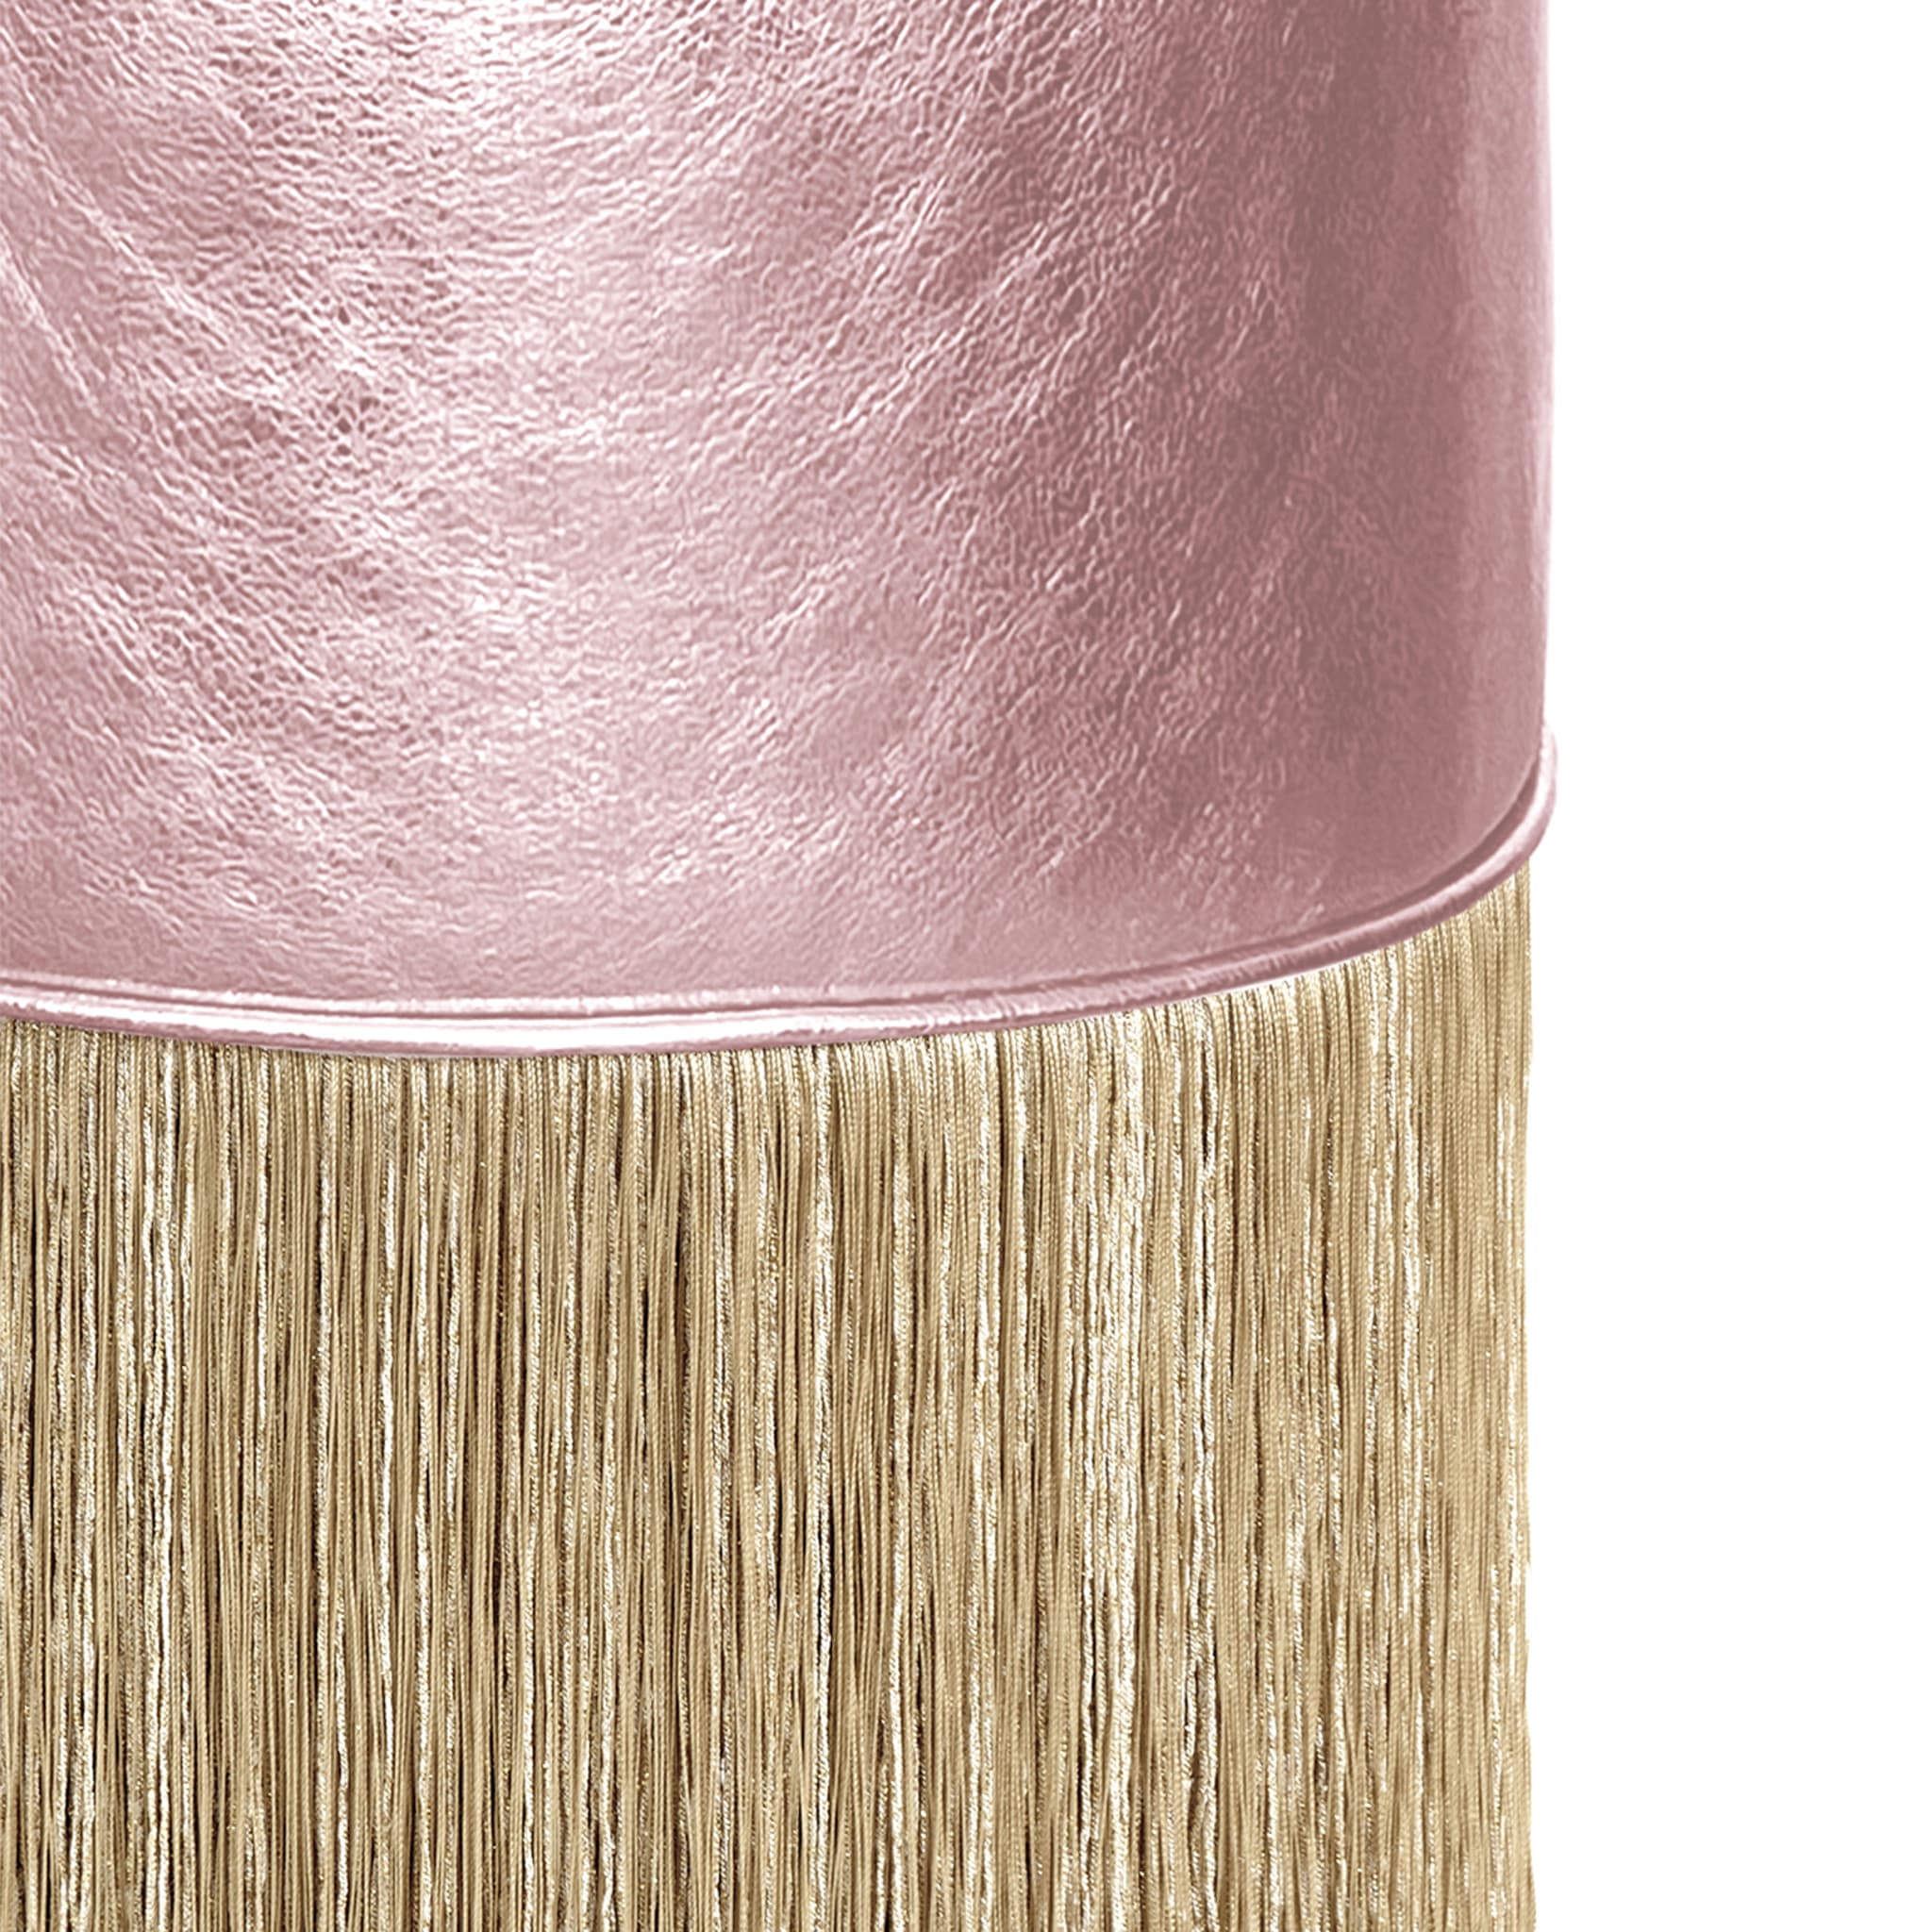 Gleaming Pink Leather Gold Fringes Pouf by Lorenza Bozzoli - Alternative view 1